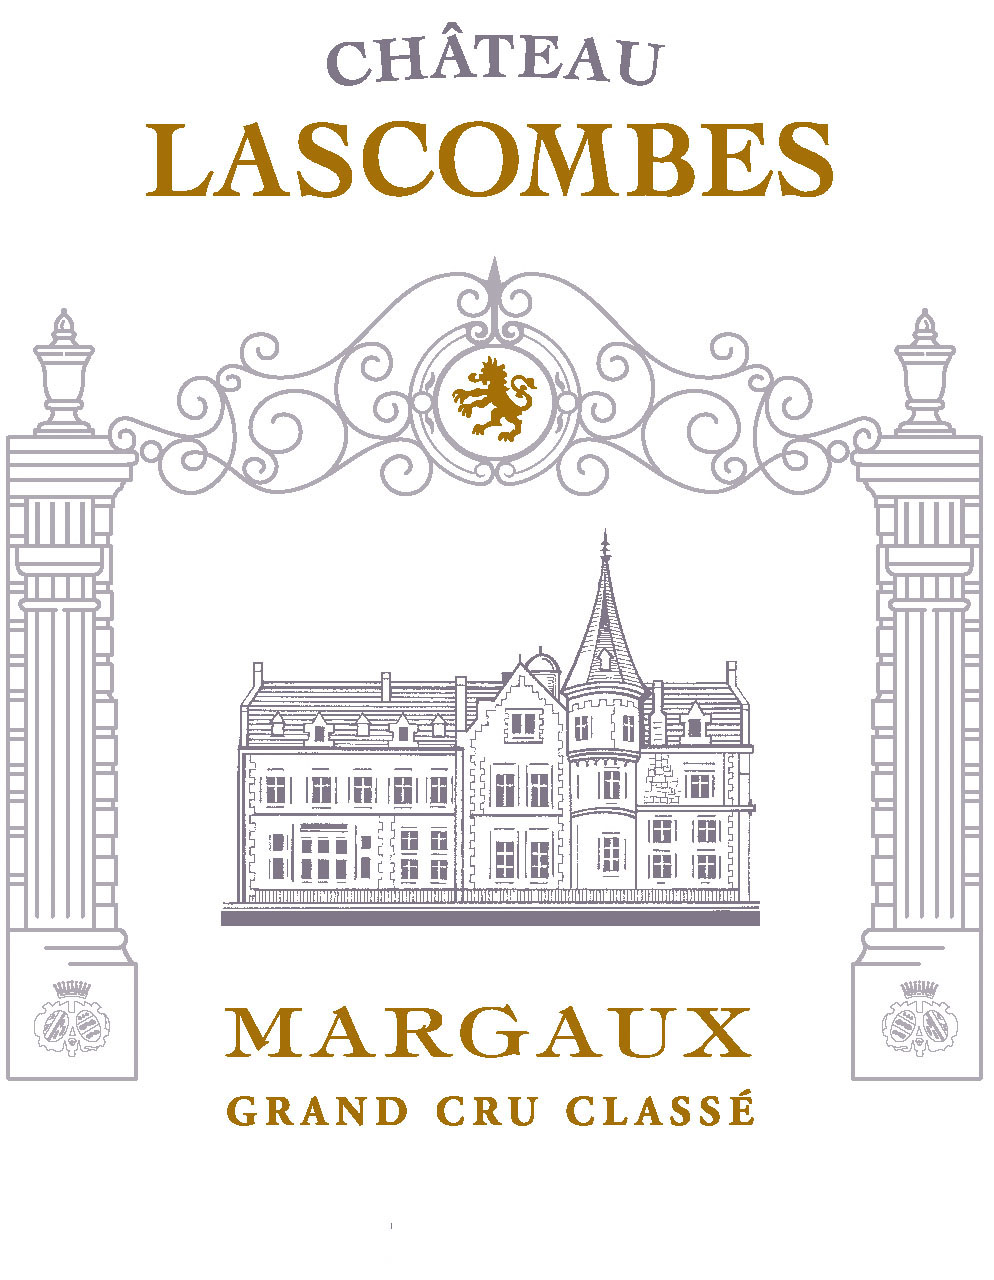 Chateau Lascombes label